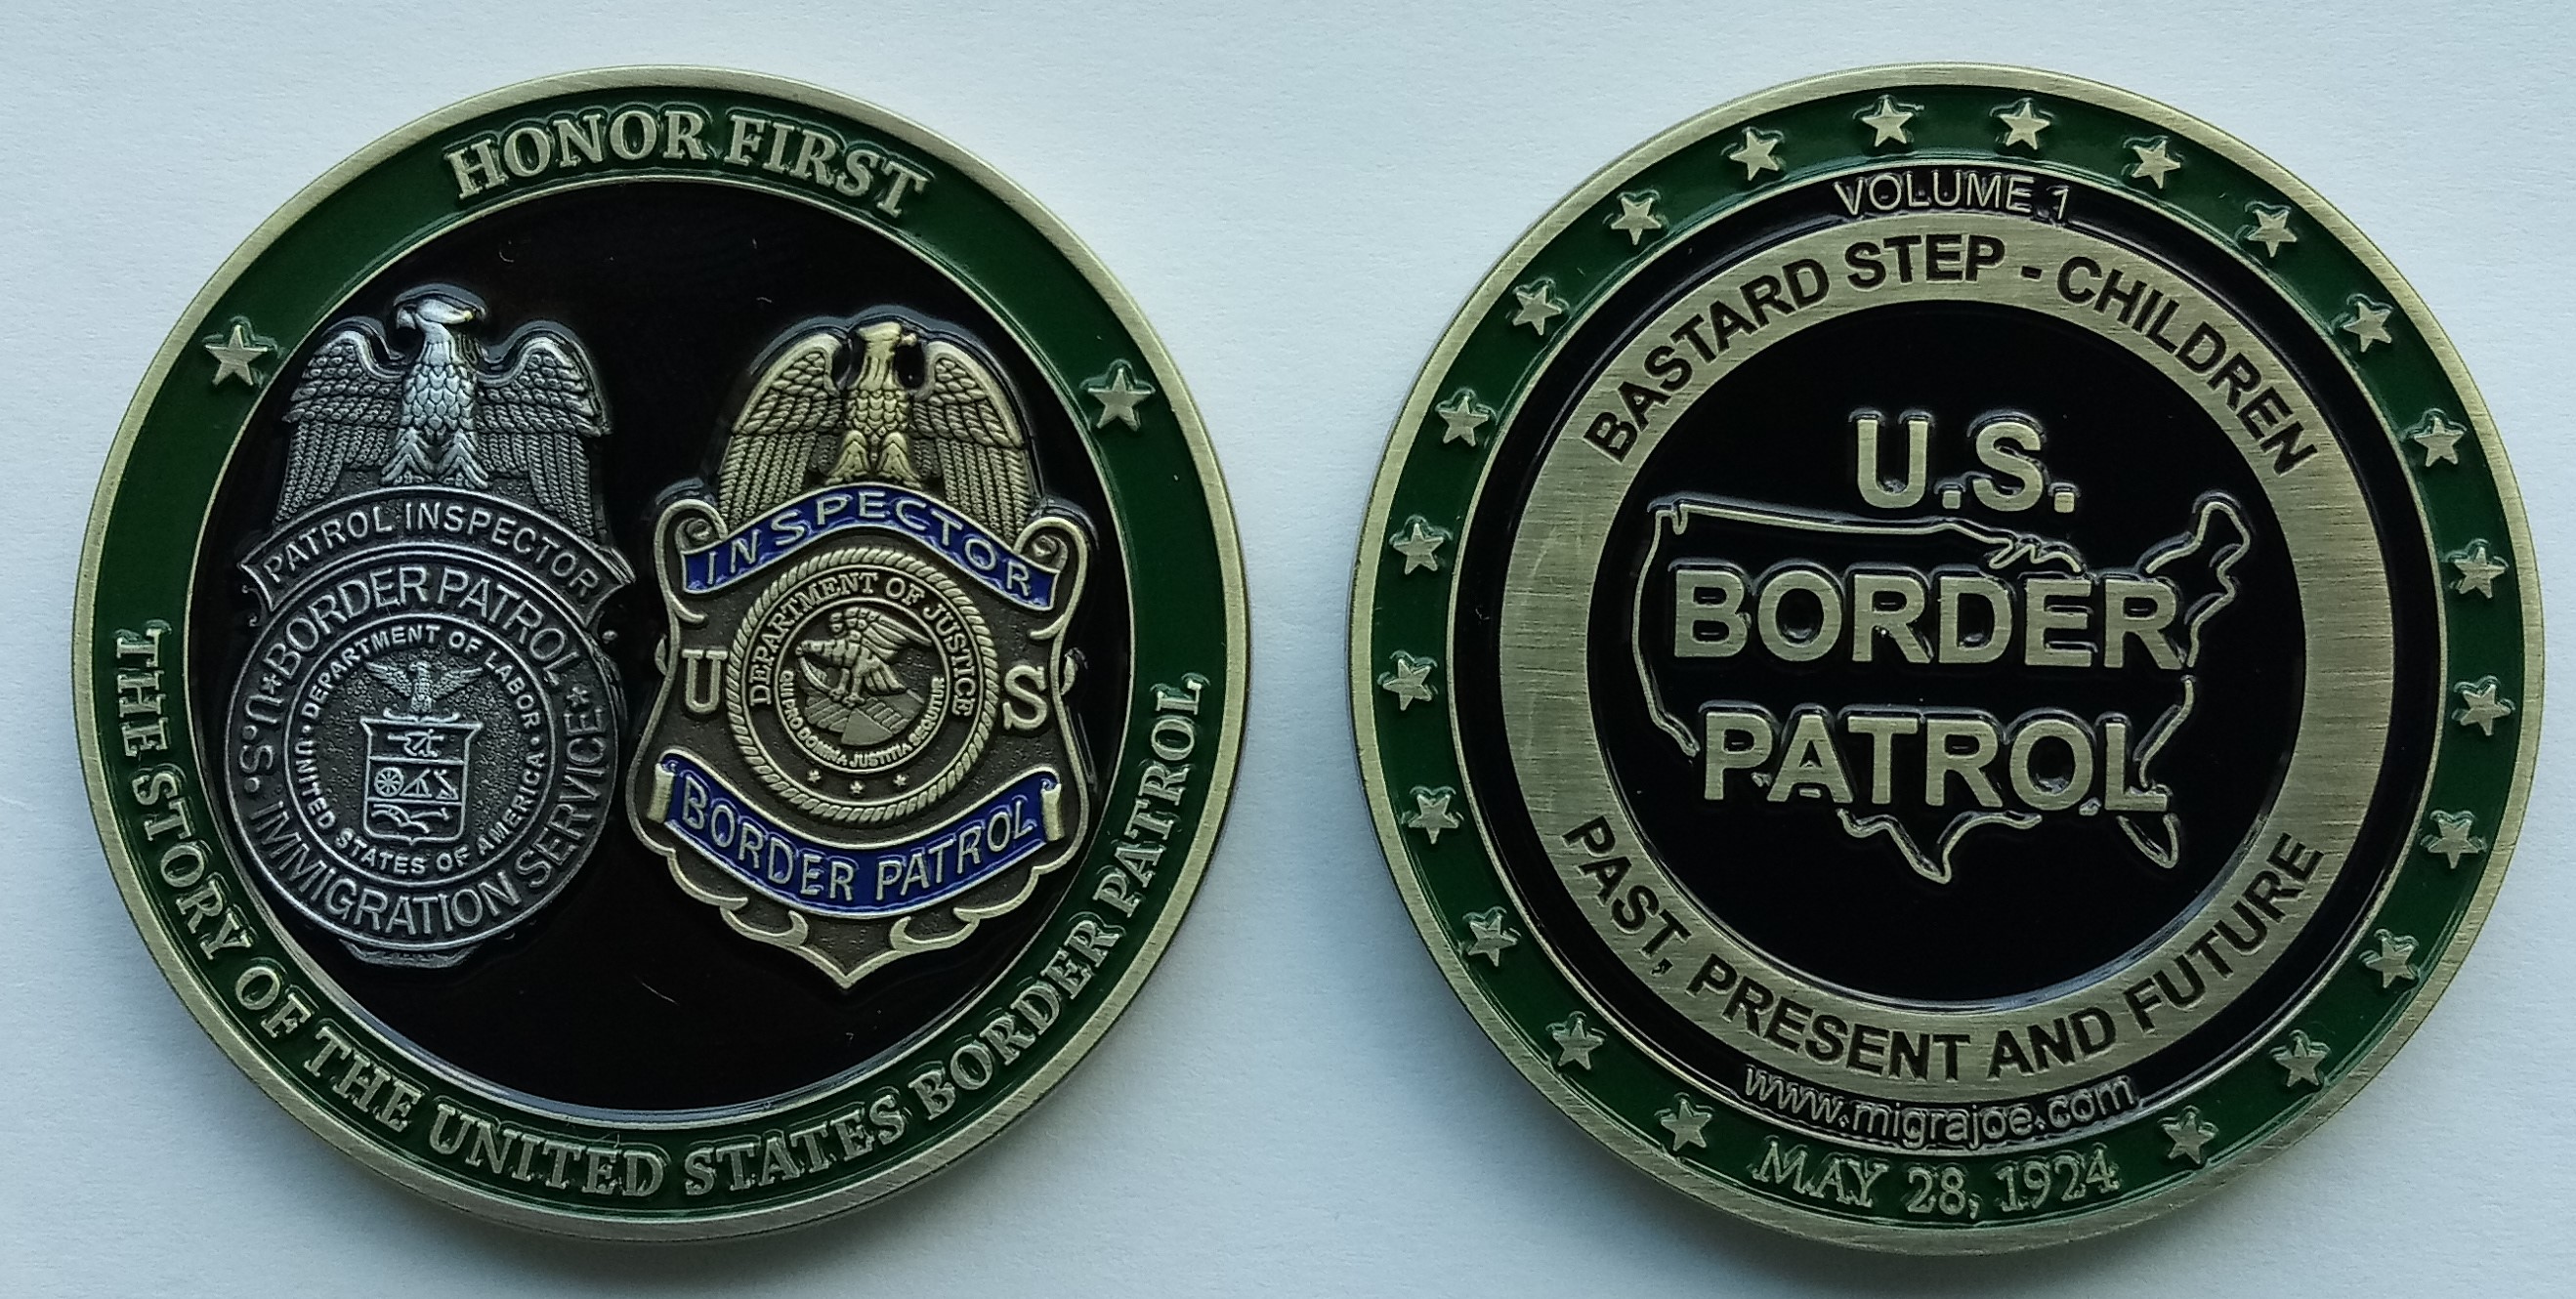 HONOR FIRST:  THE STORY OF THE U.S. BORDER PATROL